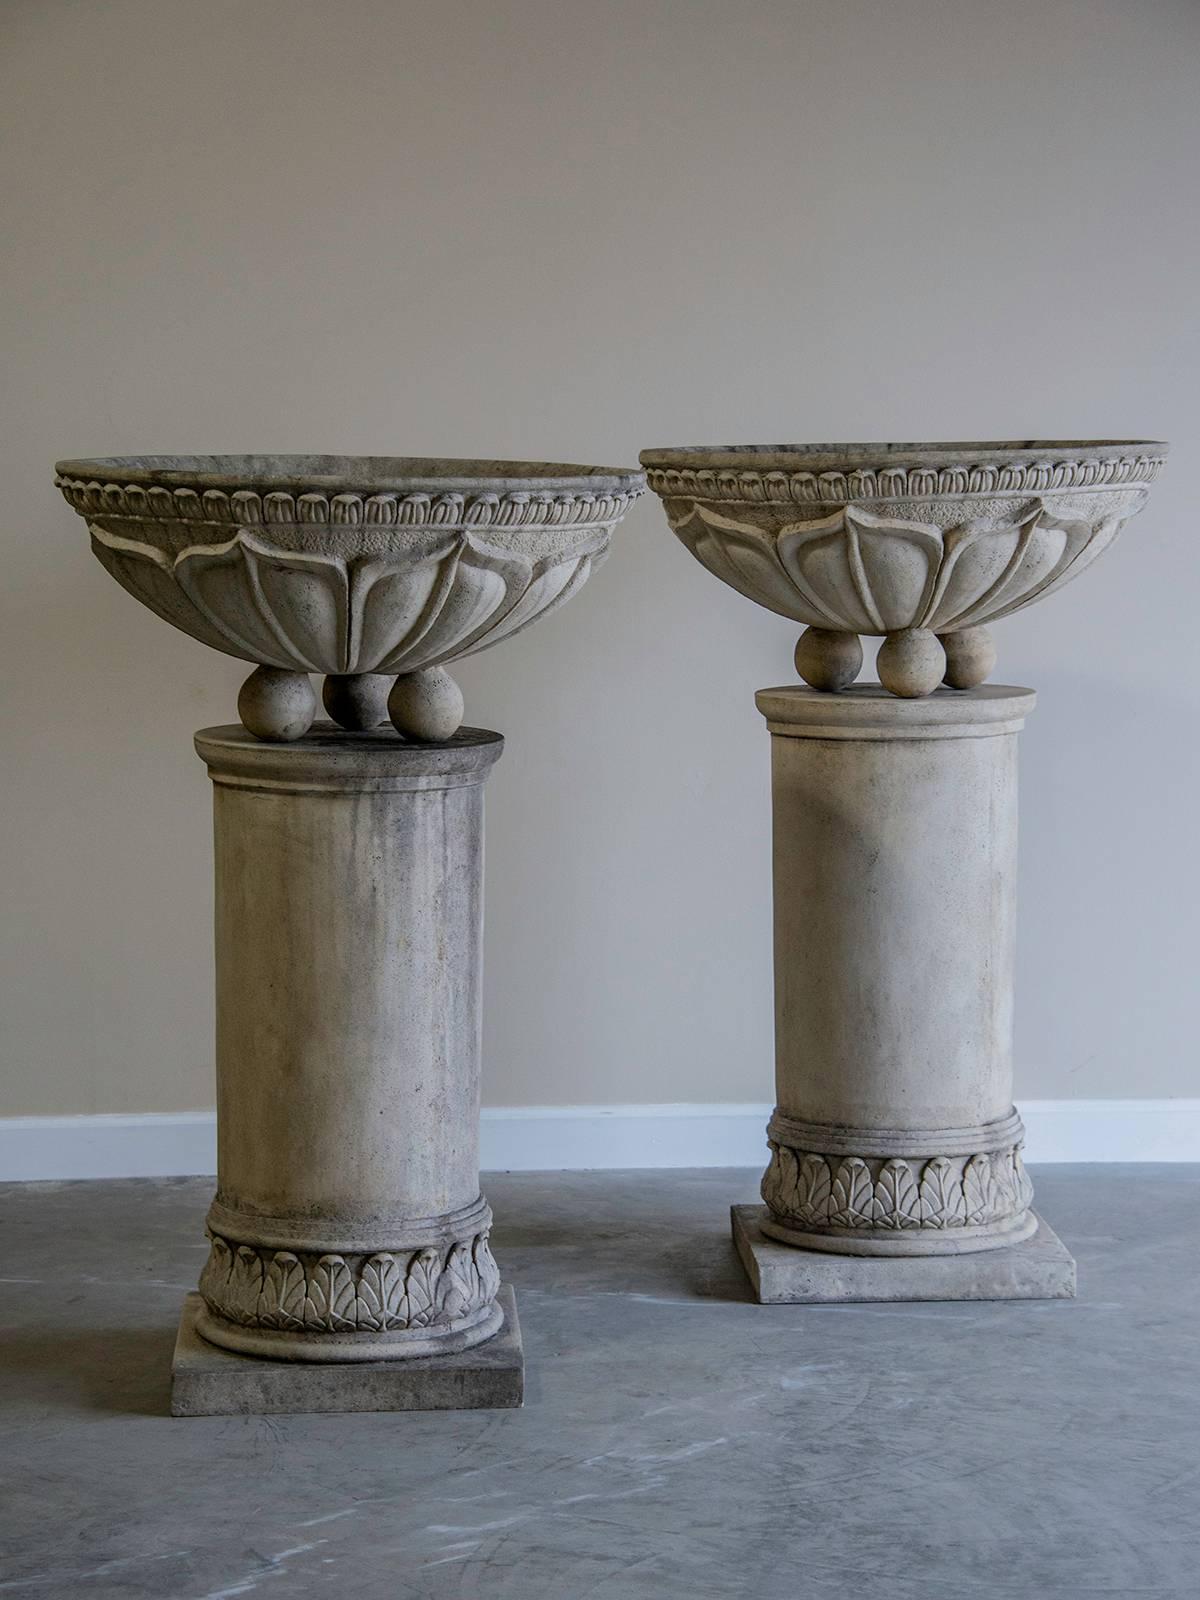 Receive our new selections direct from 1stdibs by email each week. Please click Follow Dealer below and see them first!

Pair of vintage French circular basins atop columns with relief decoration. These grand scale architecturally inaspired garden